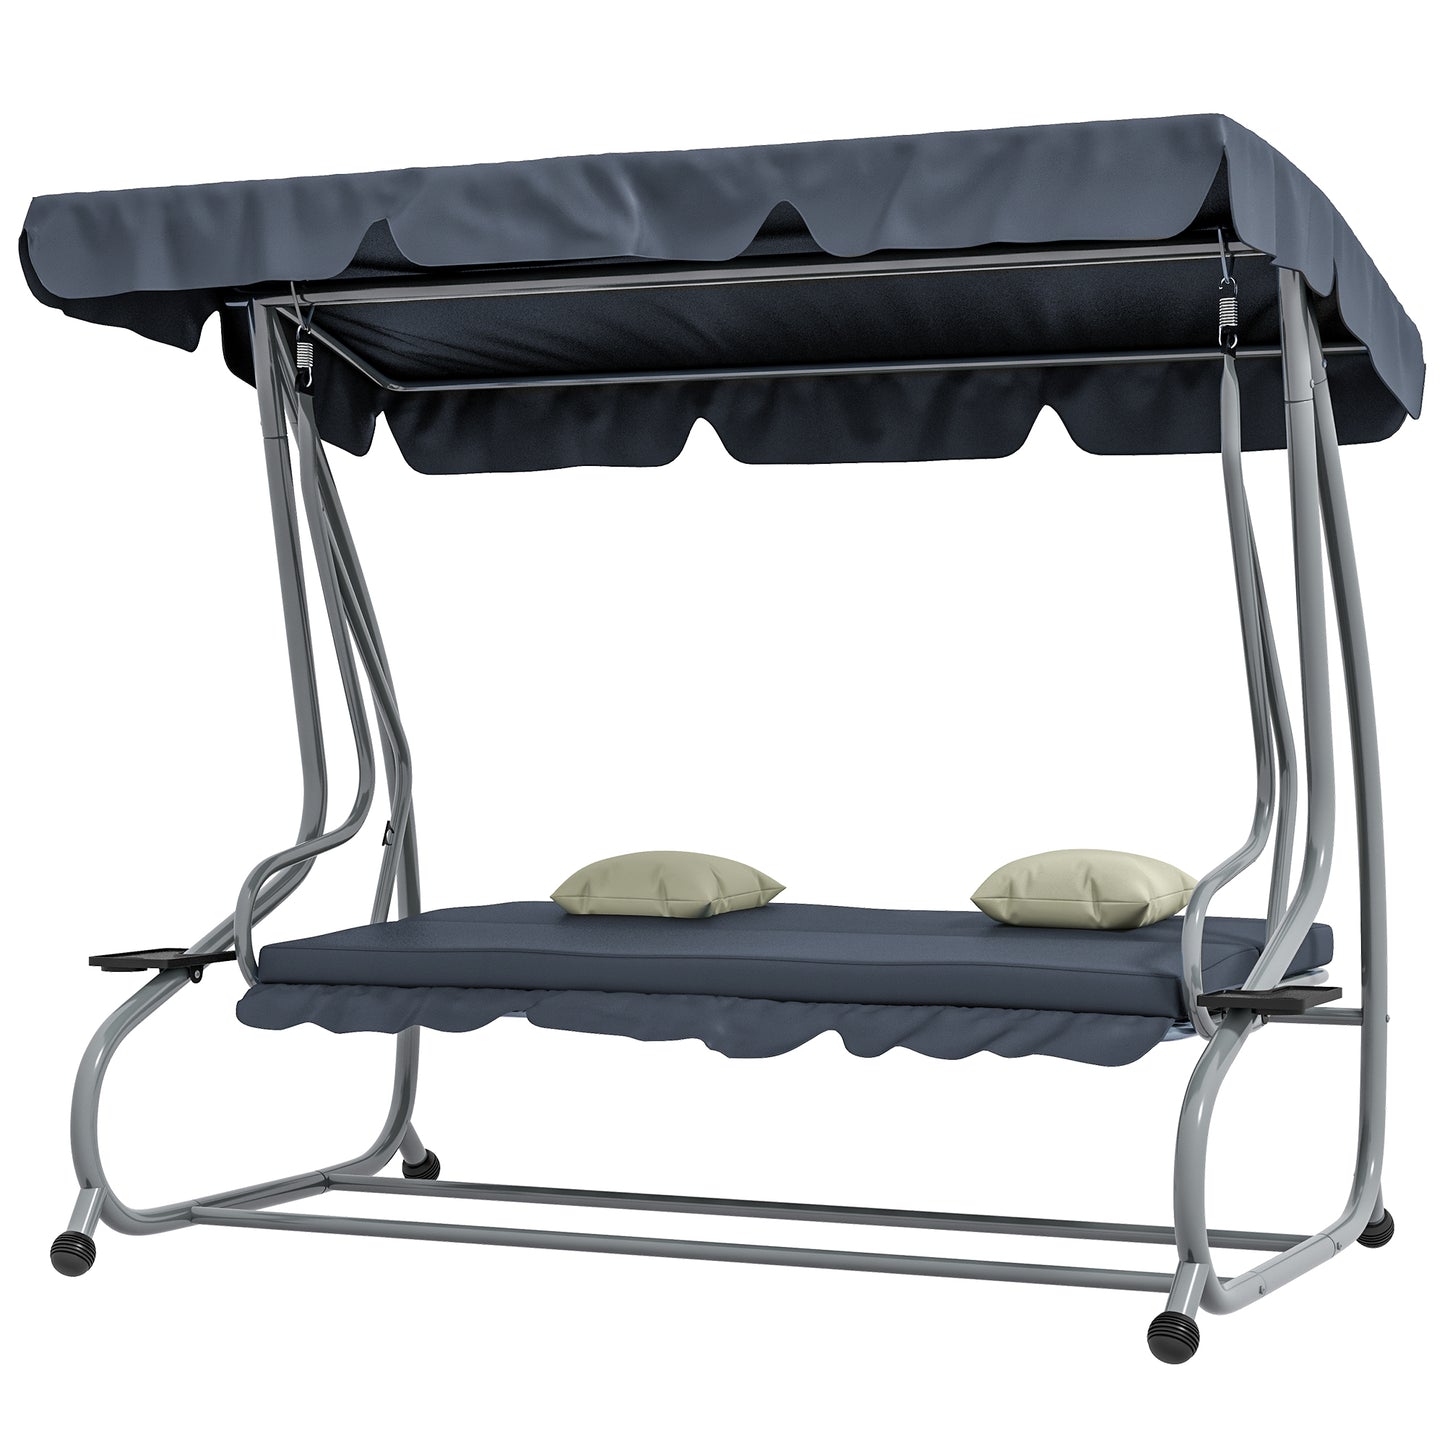 3-Seat Outdoor Patio Swing Canopy Chair, Converting Flat Bed with Adjustable Shade, Cushions, Cup Holder, Dark Grey at Gallery Canada